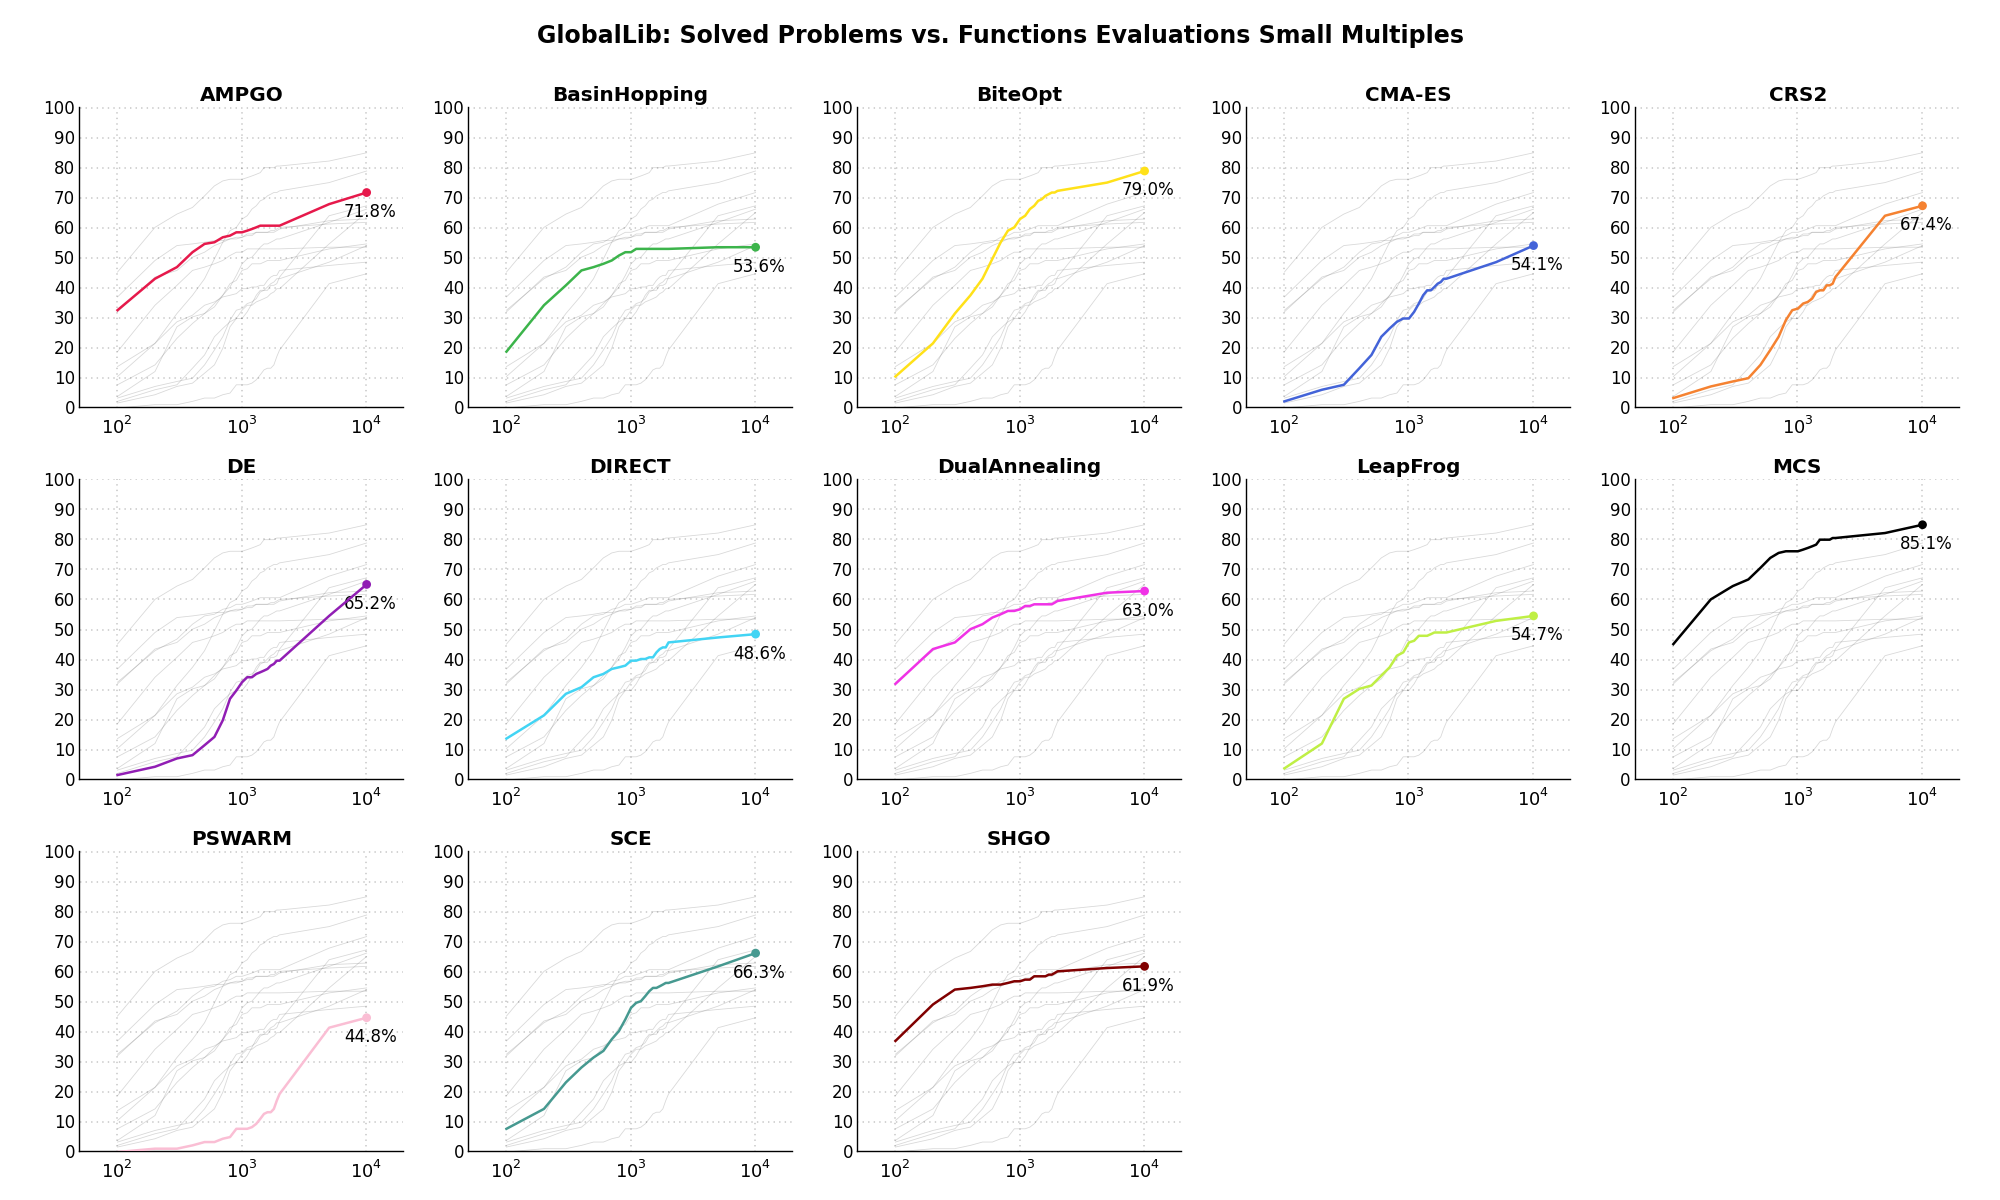 Percentage of problems solved given a fixed number of function evaluations on the GlobalLib test suite